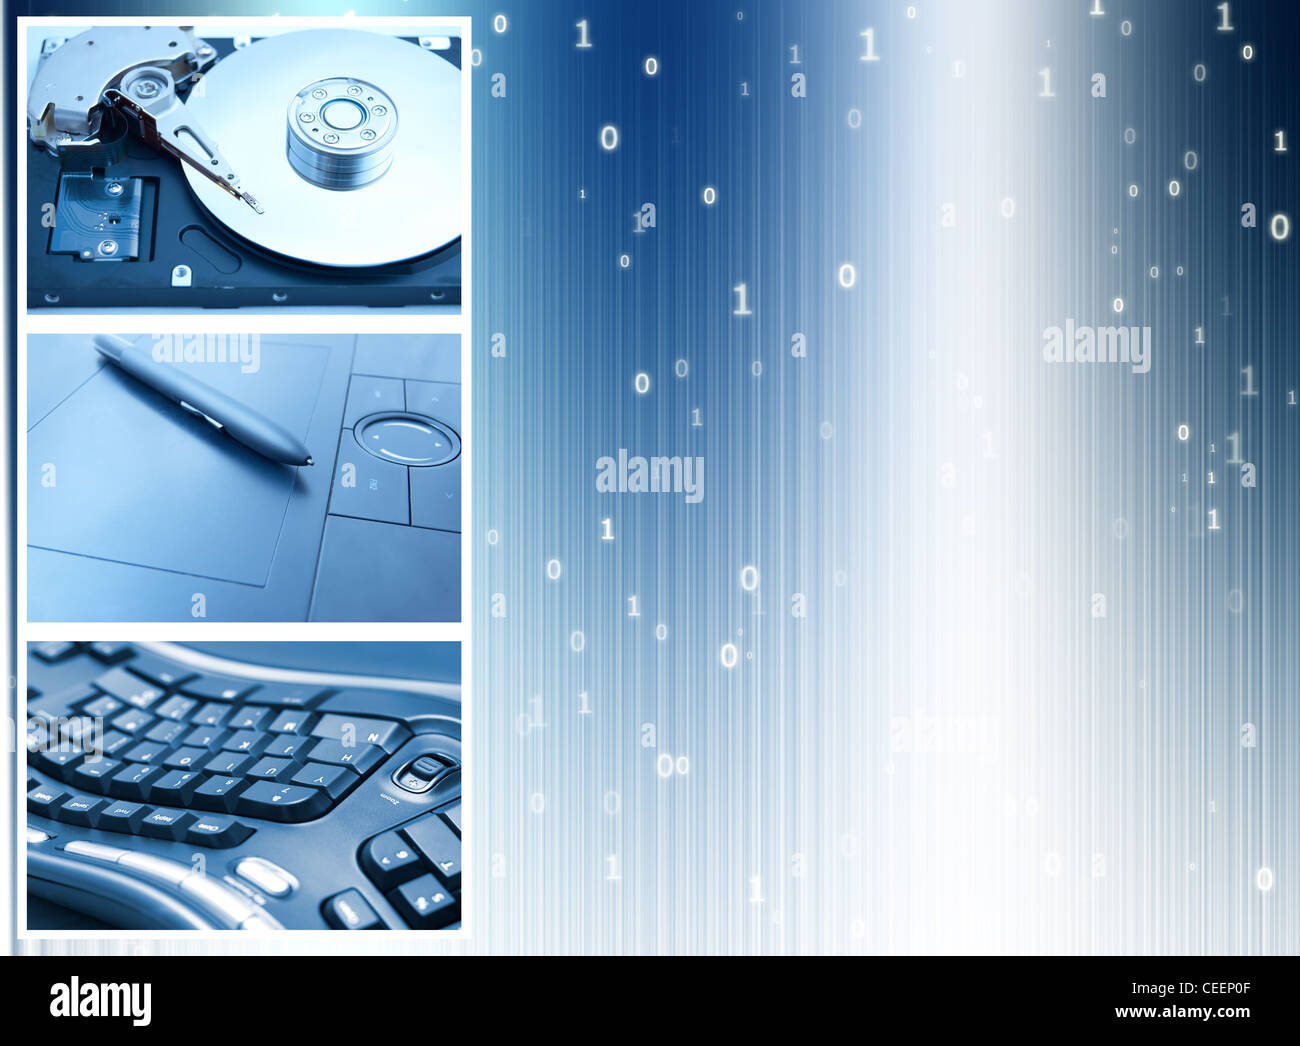 Collage: Information technology (IT). Harddrive, graphic tablet and ergonomic keyboard. Stock Photo